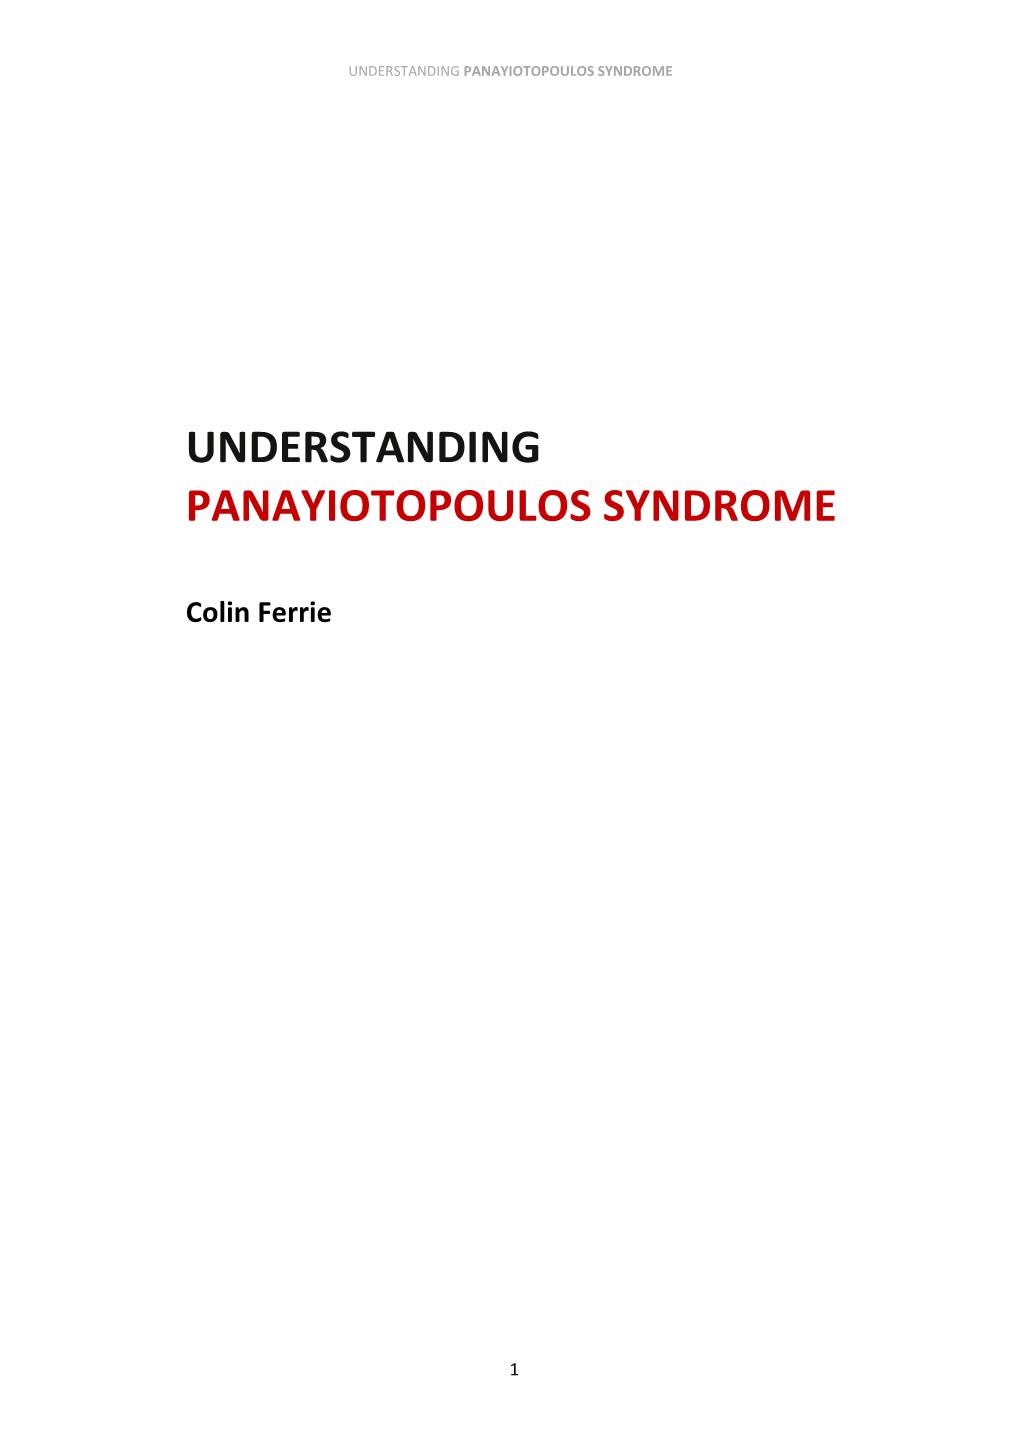 Understanding Panayiotopoulos Syndrome